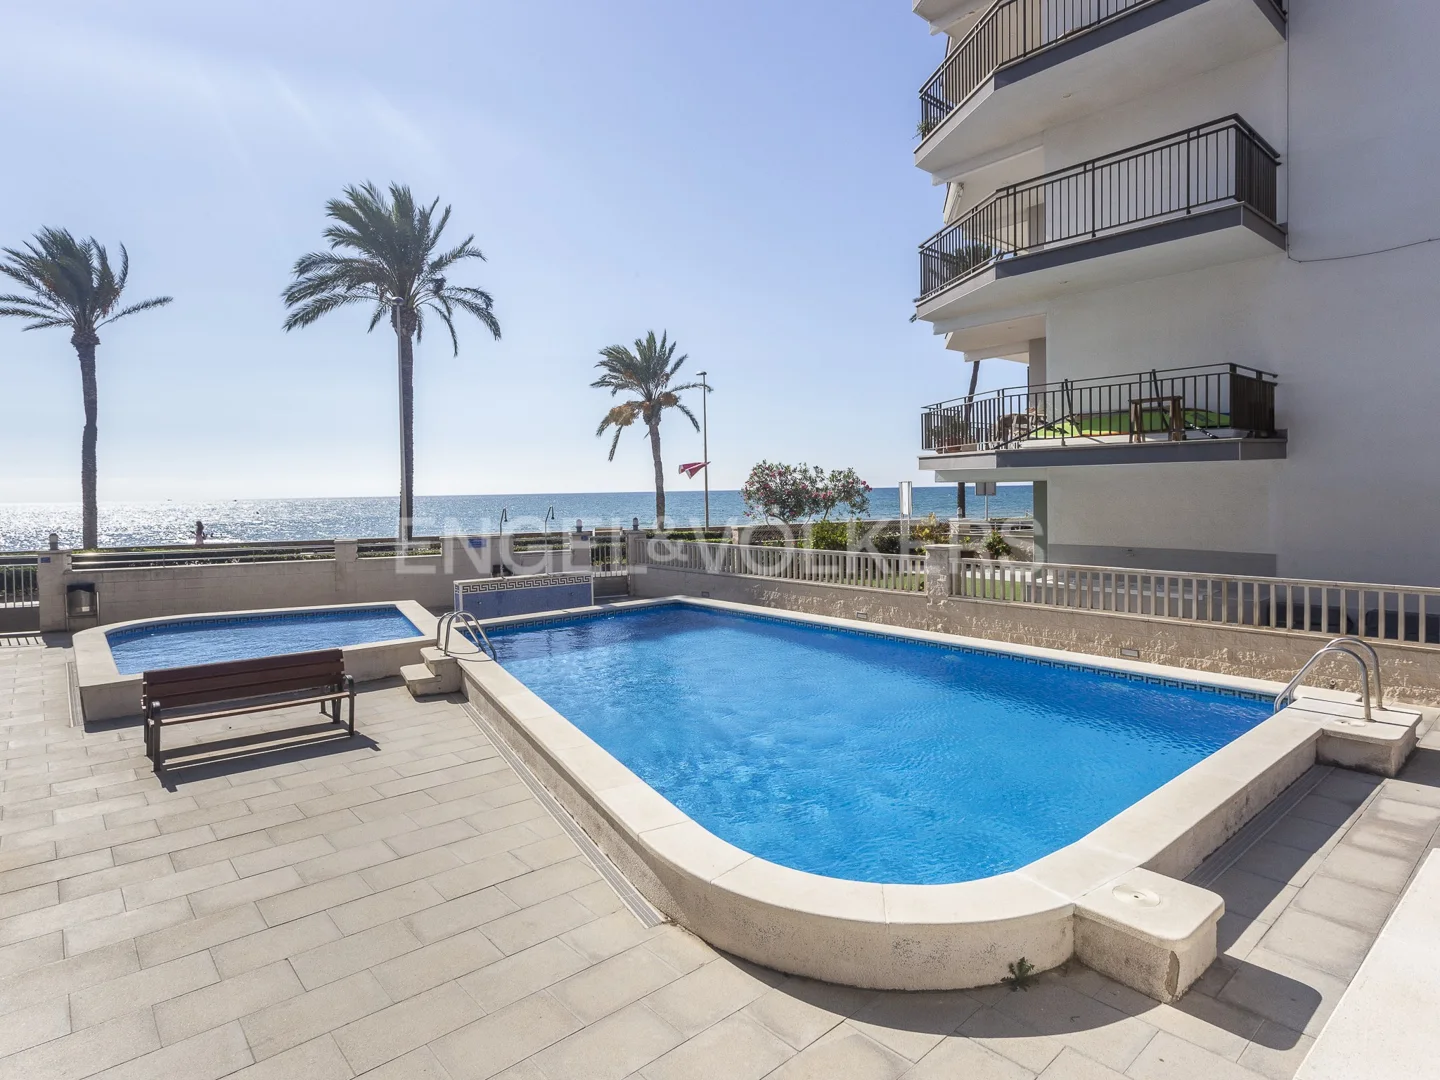 Seafront Apartment with beach views!